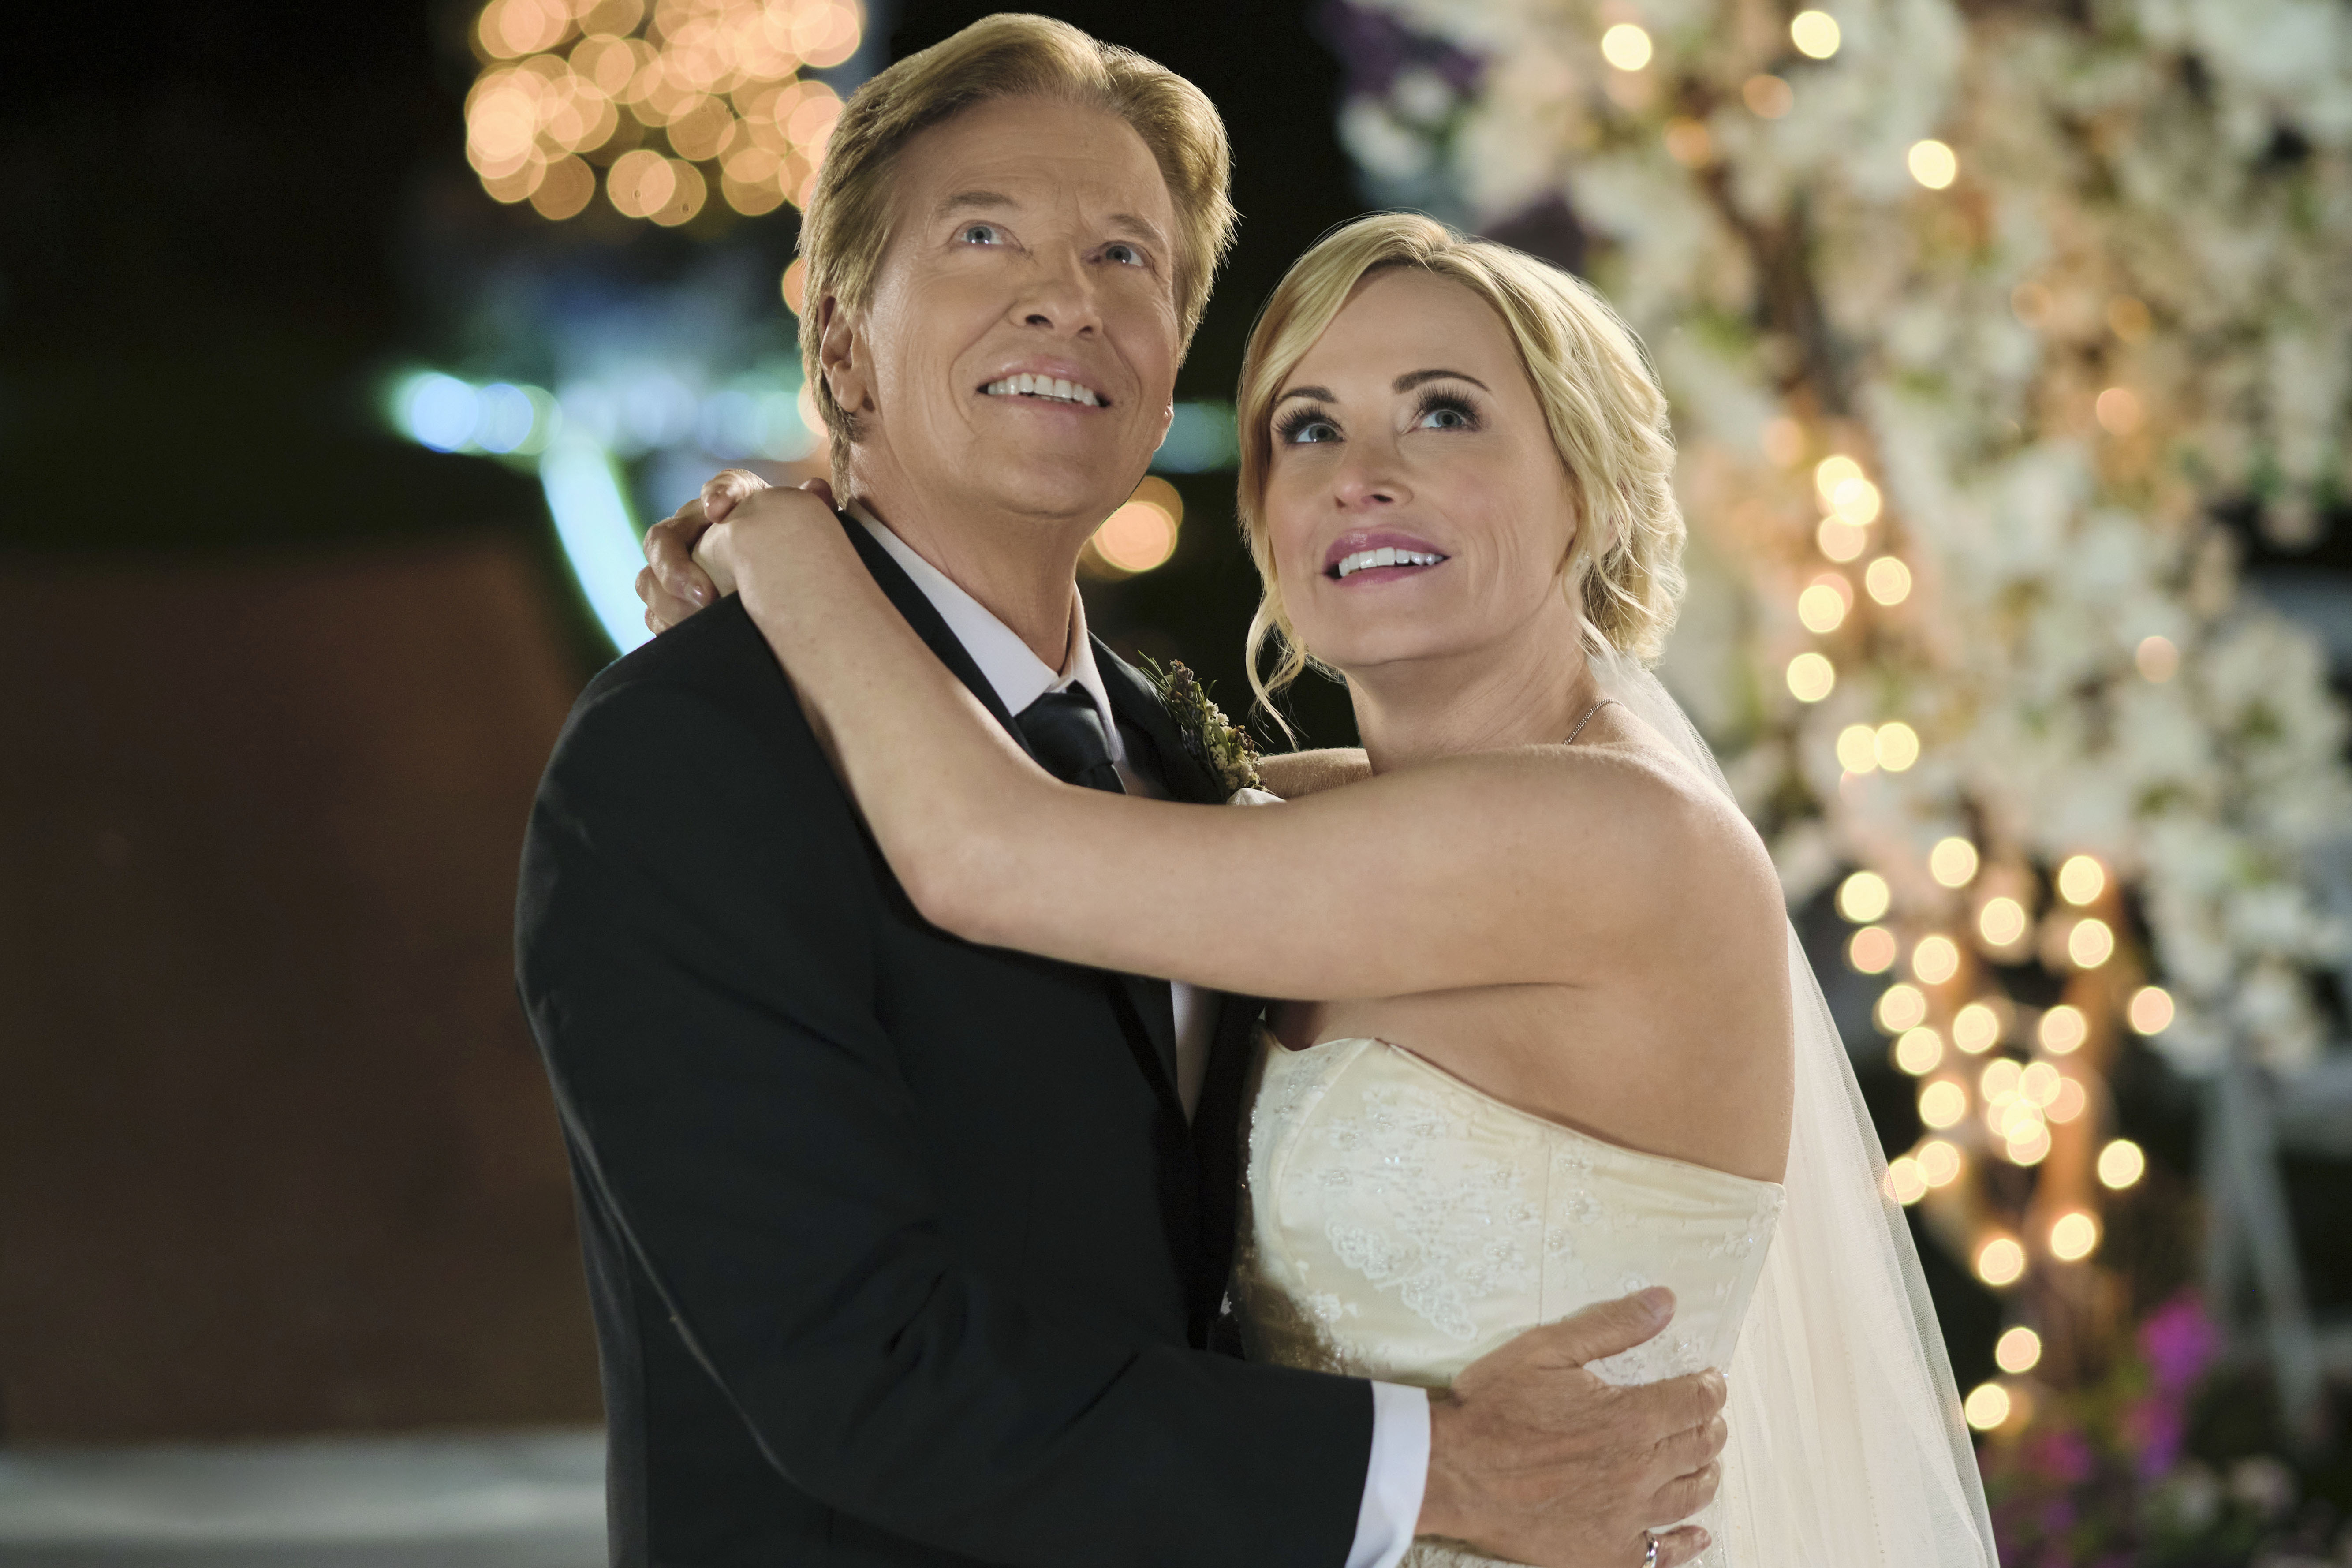 Josie Bissett, wearing a wedding dress, with her arms around Jack Wagner in 'Sealed With a Kiss: Wedding March 6'